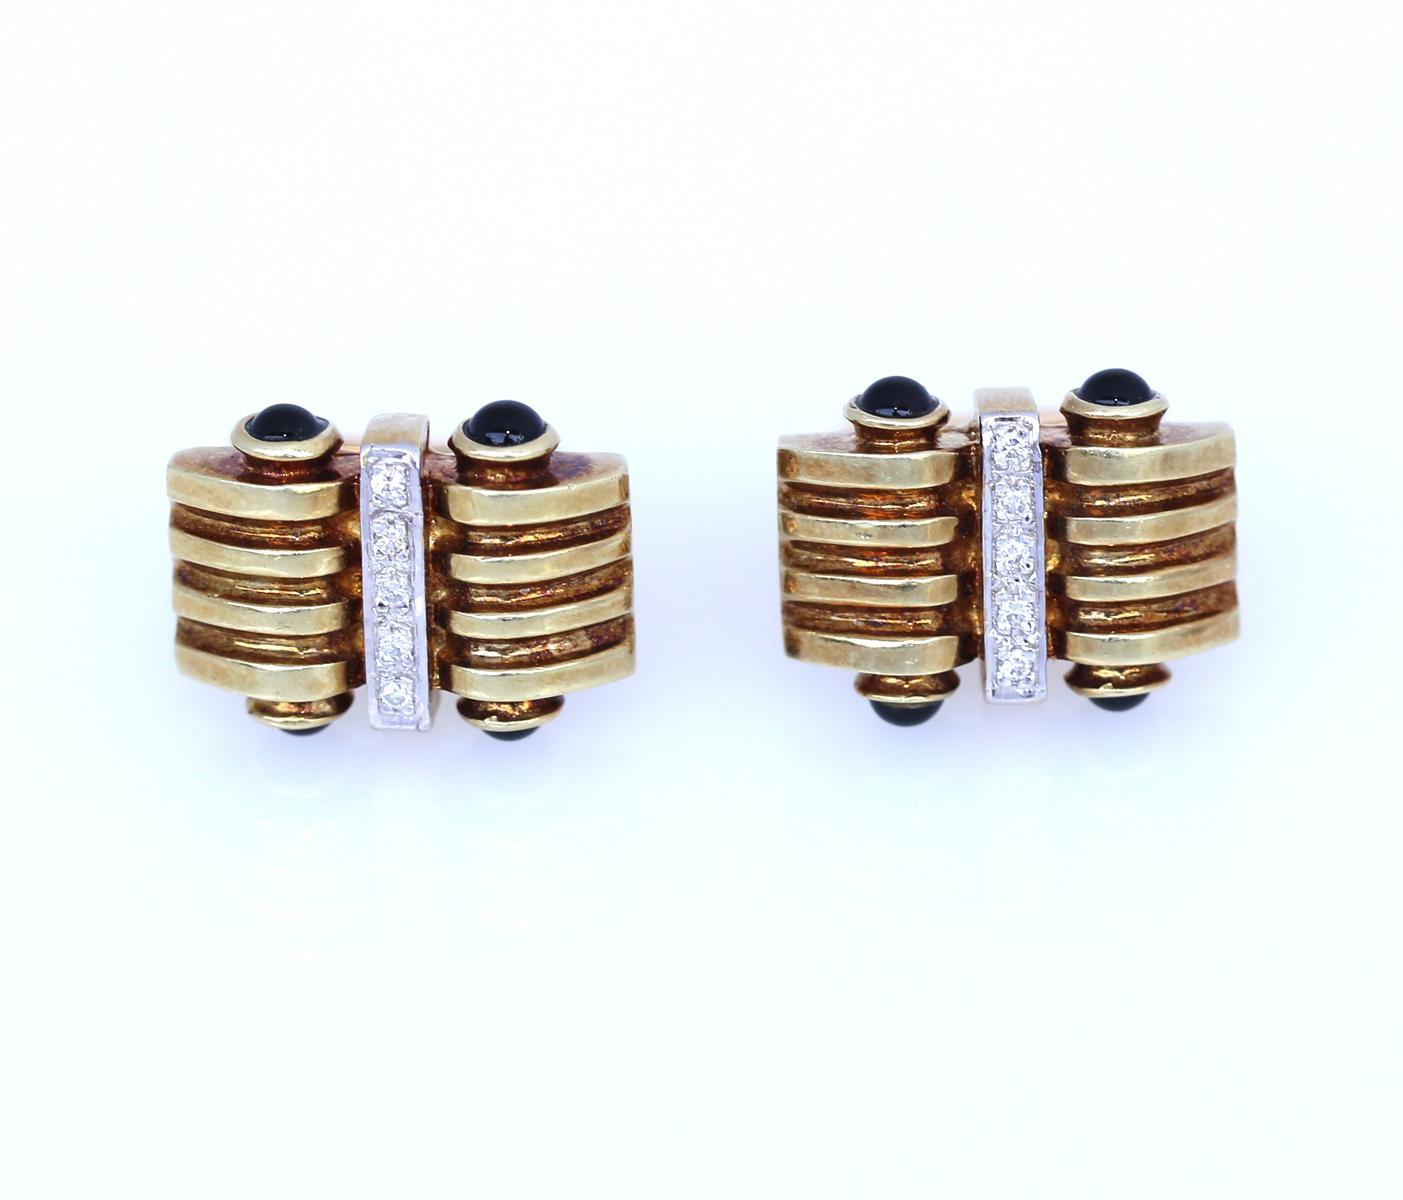 Late Art Deco style Gold Cufflinks with four Cabochon Sapphires in each. 
Back in the day, only a really wealthy gentleman could afford such a precious item.
Today it has lost none of its glamour. It is an amazing addition to any jewelry collection,